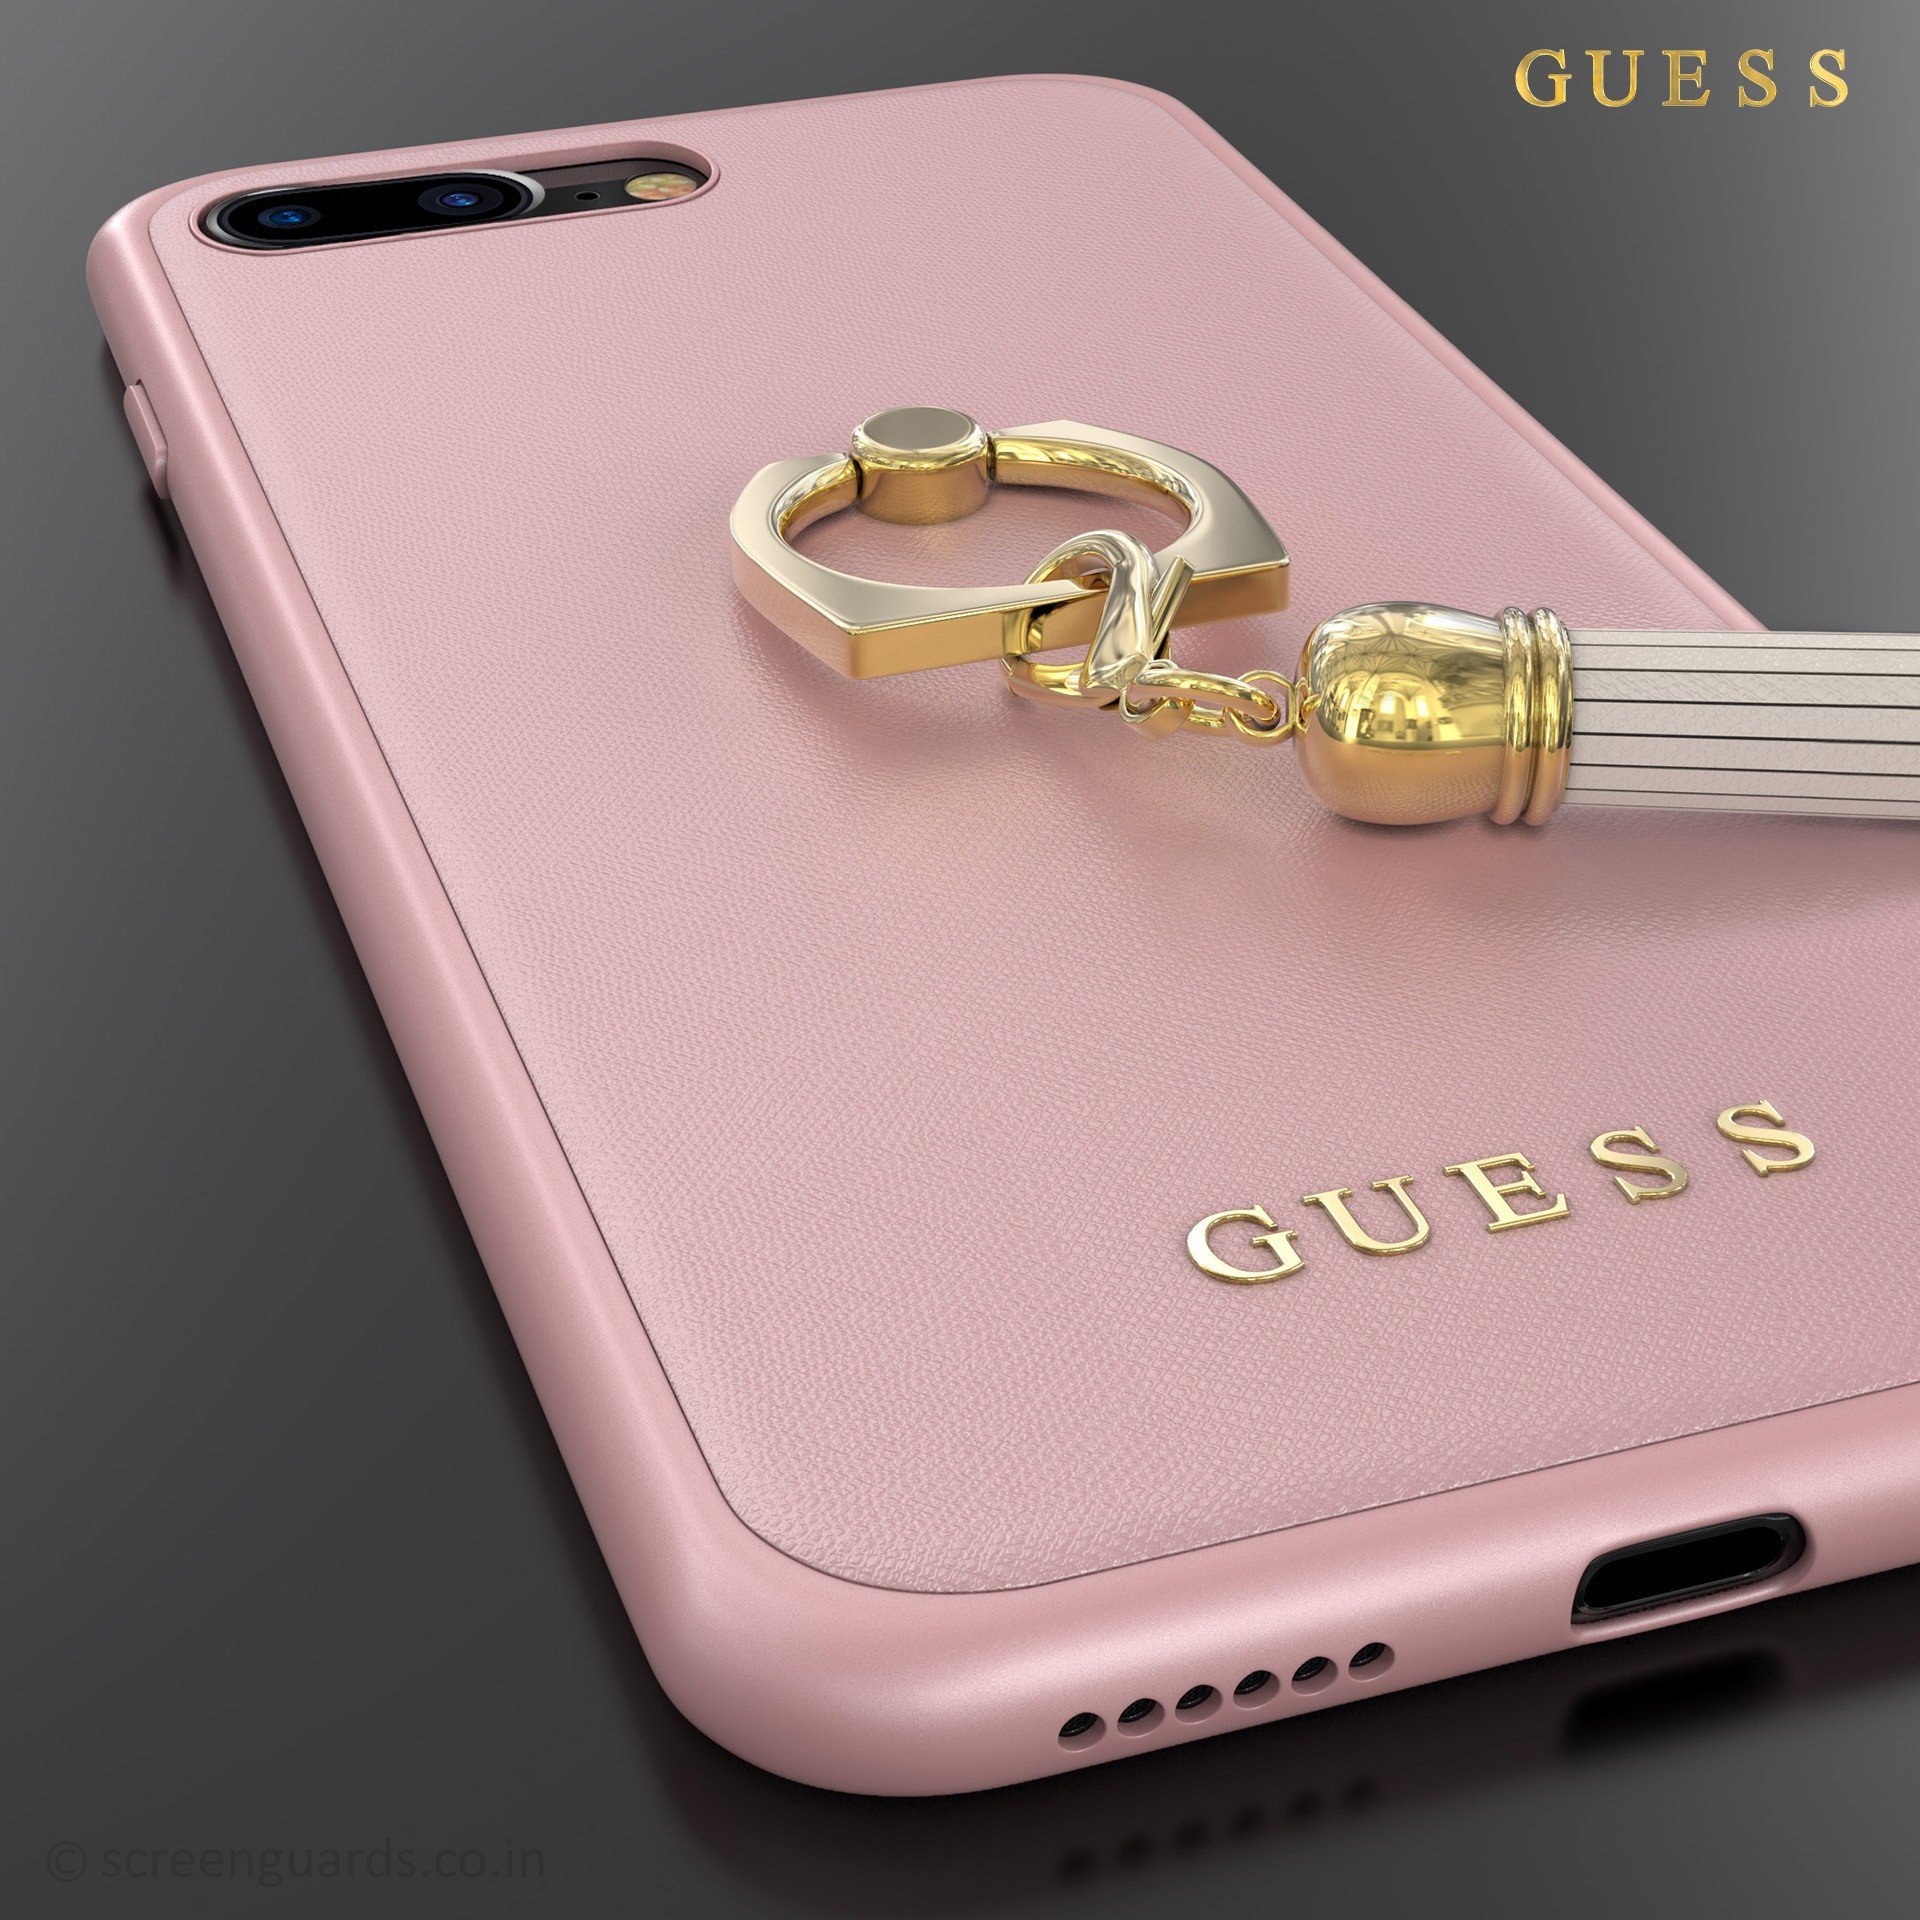 GUESS ® Apple iPhone 7 plus Premium Luther Leather 2K Gold + inbuilt ring stand + detachable Tassels - iPhone 7 Plus - Apple - Mobile / Tablet - Luxurious Covers